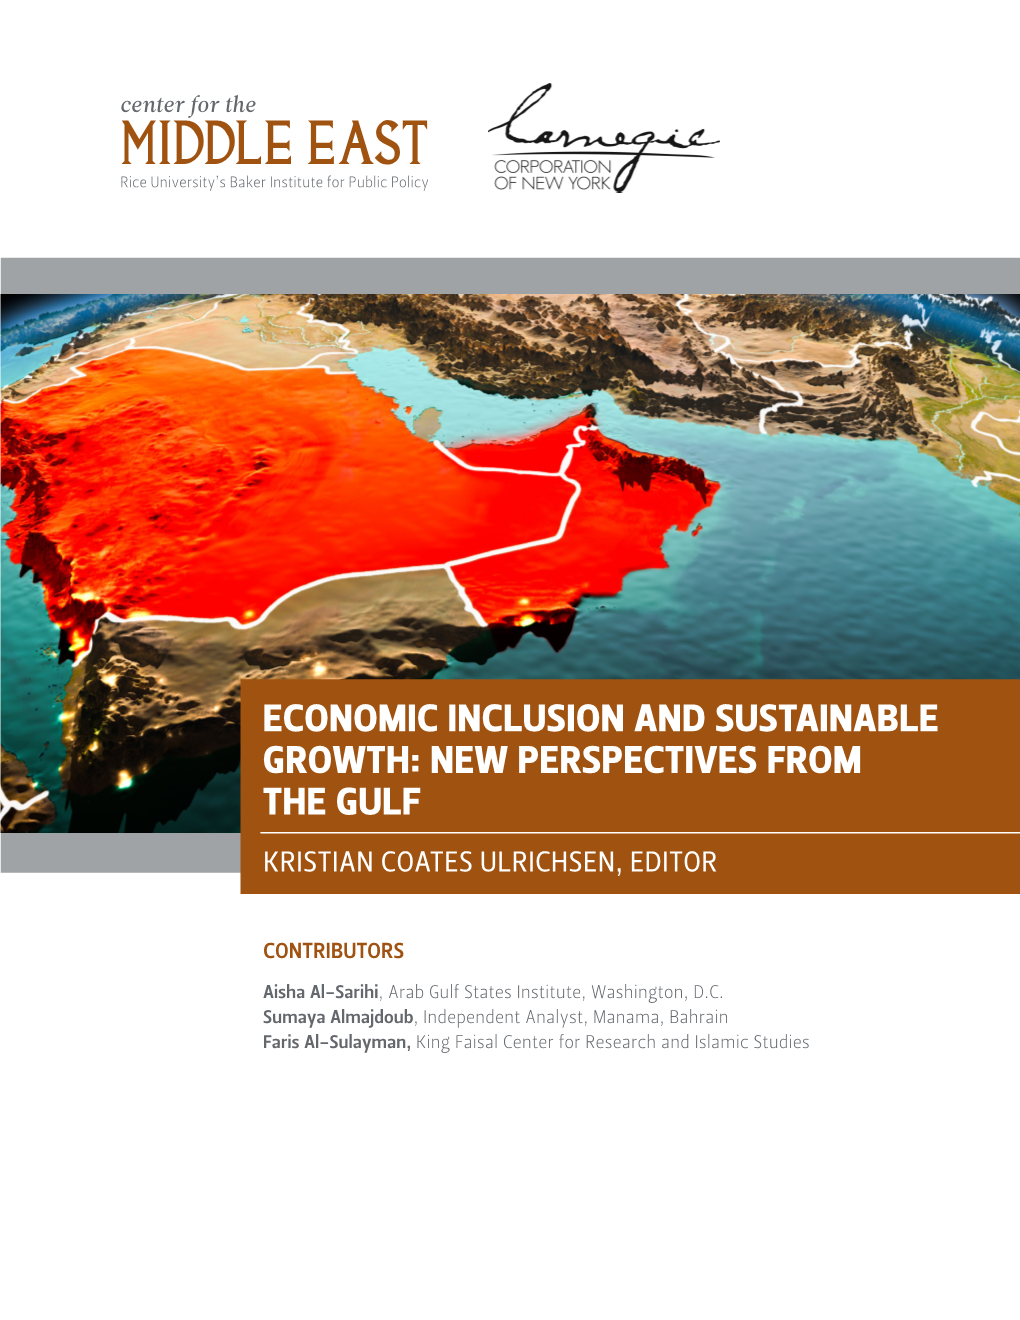 Economic Inclusion and Sustainable Growth: New Perspectives from the Gulf Kristian Coates Ulrichsen, Editor